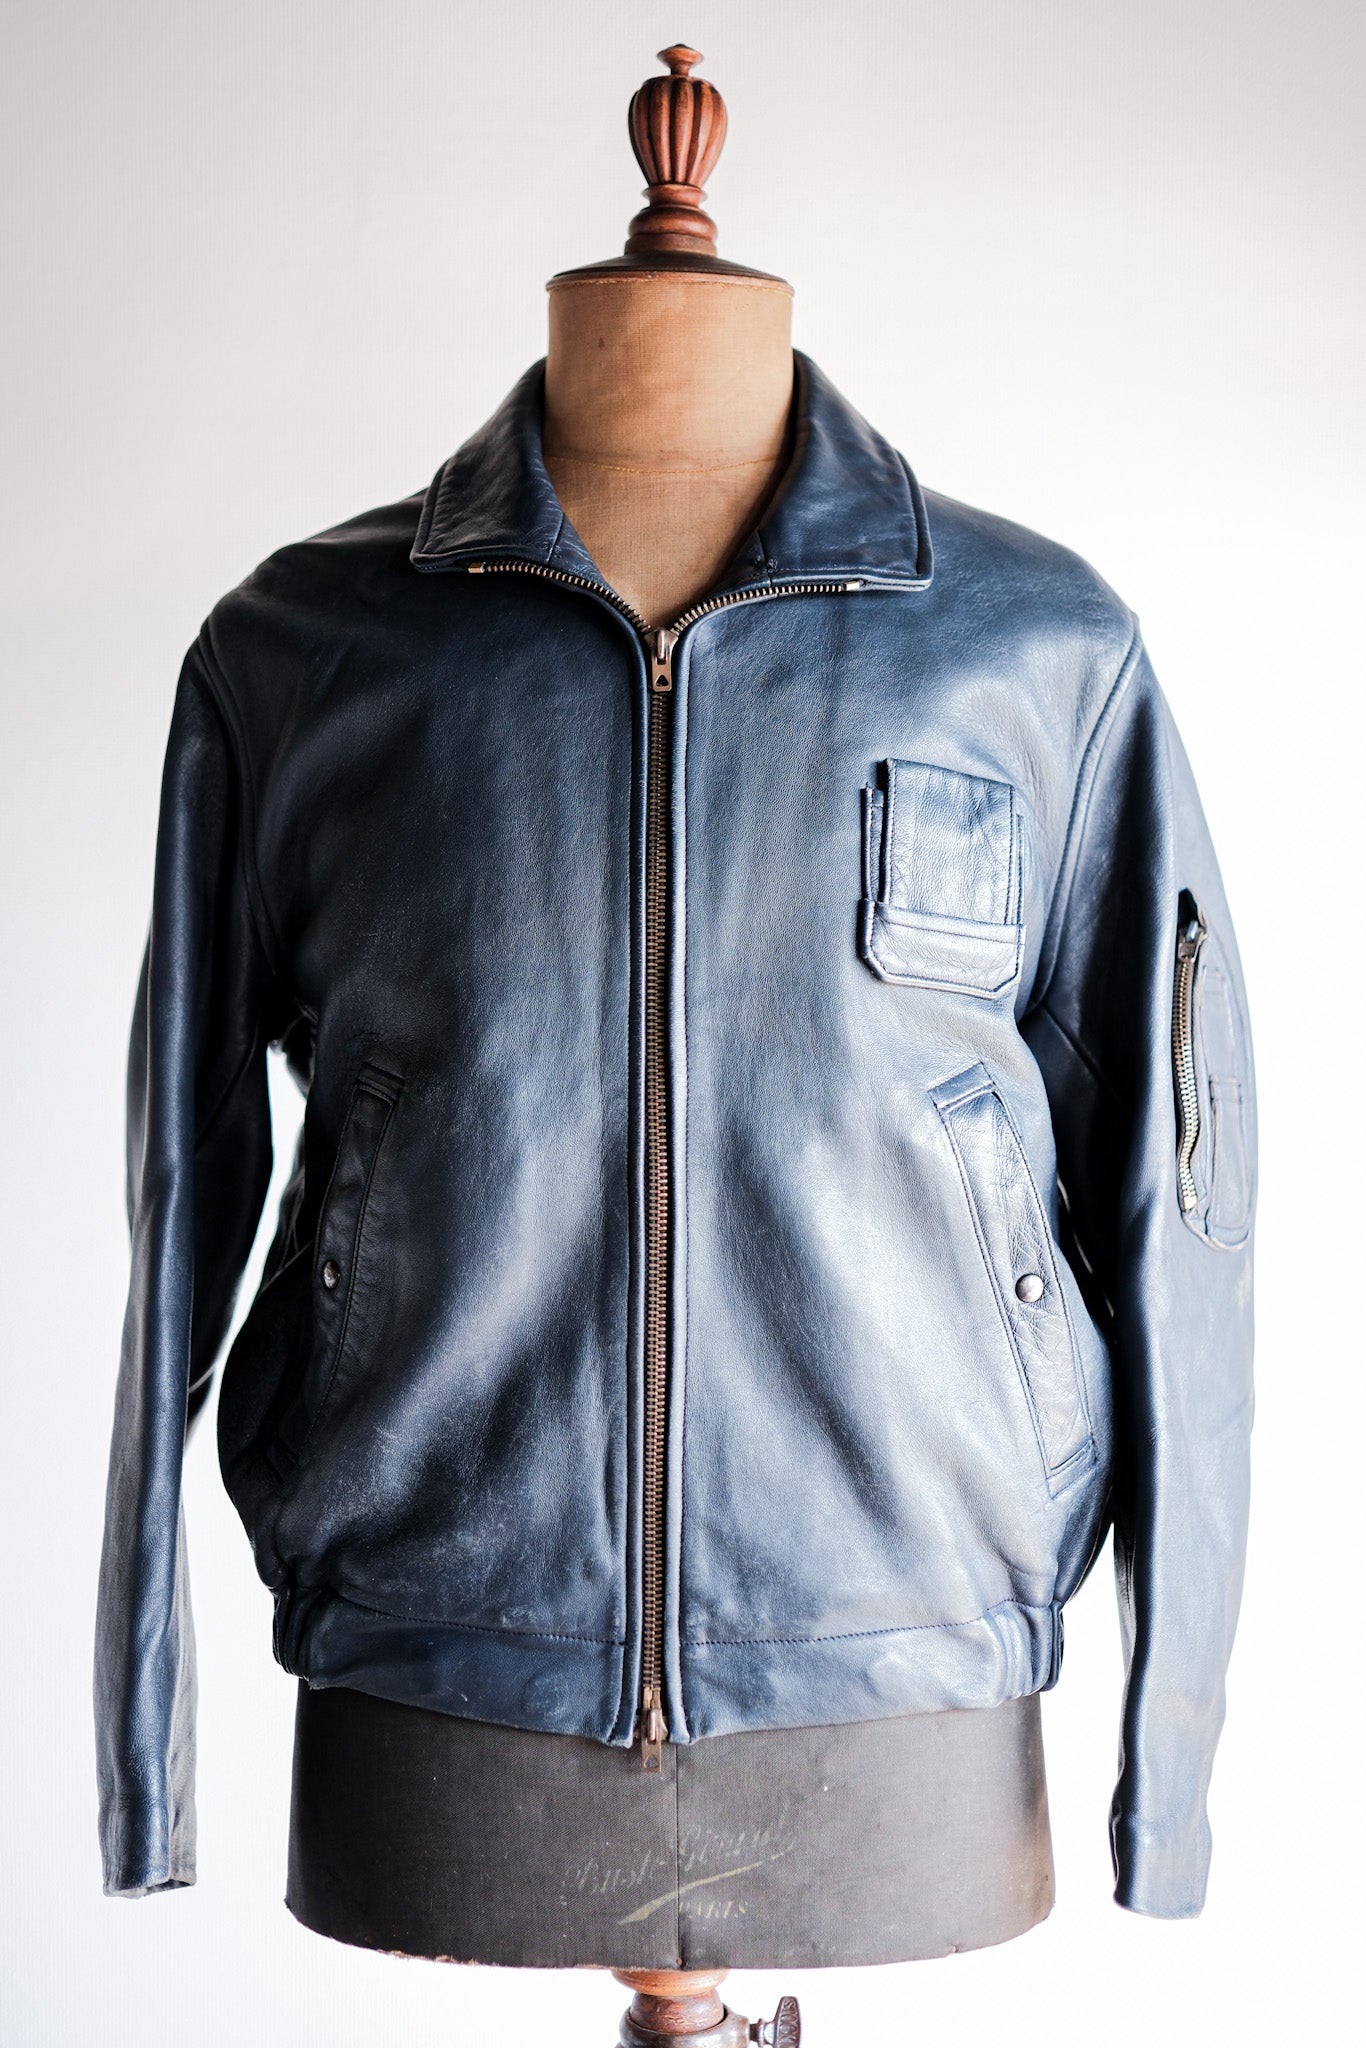 [~70's]French Air Force Pilot Leather Jacket Size.96M